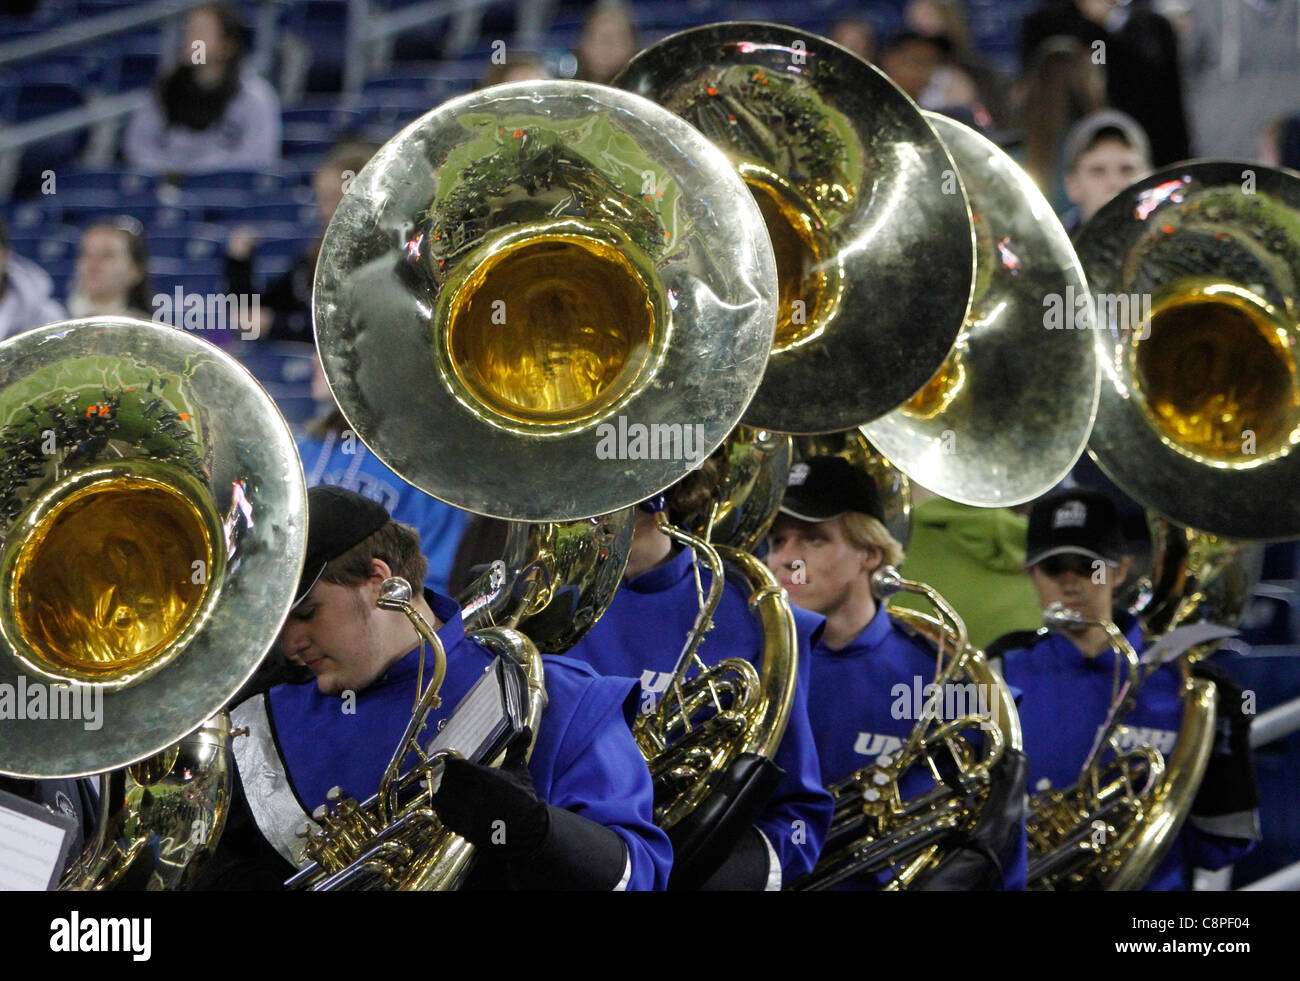 College marching band sousaphones Foto Stock